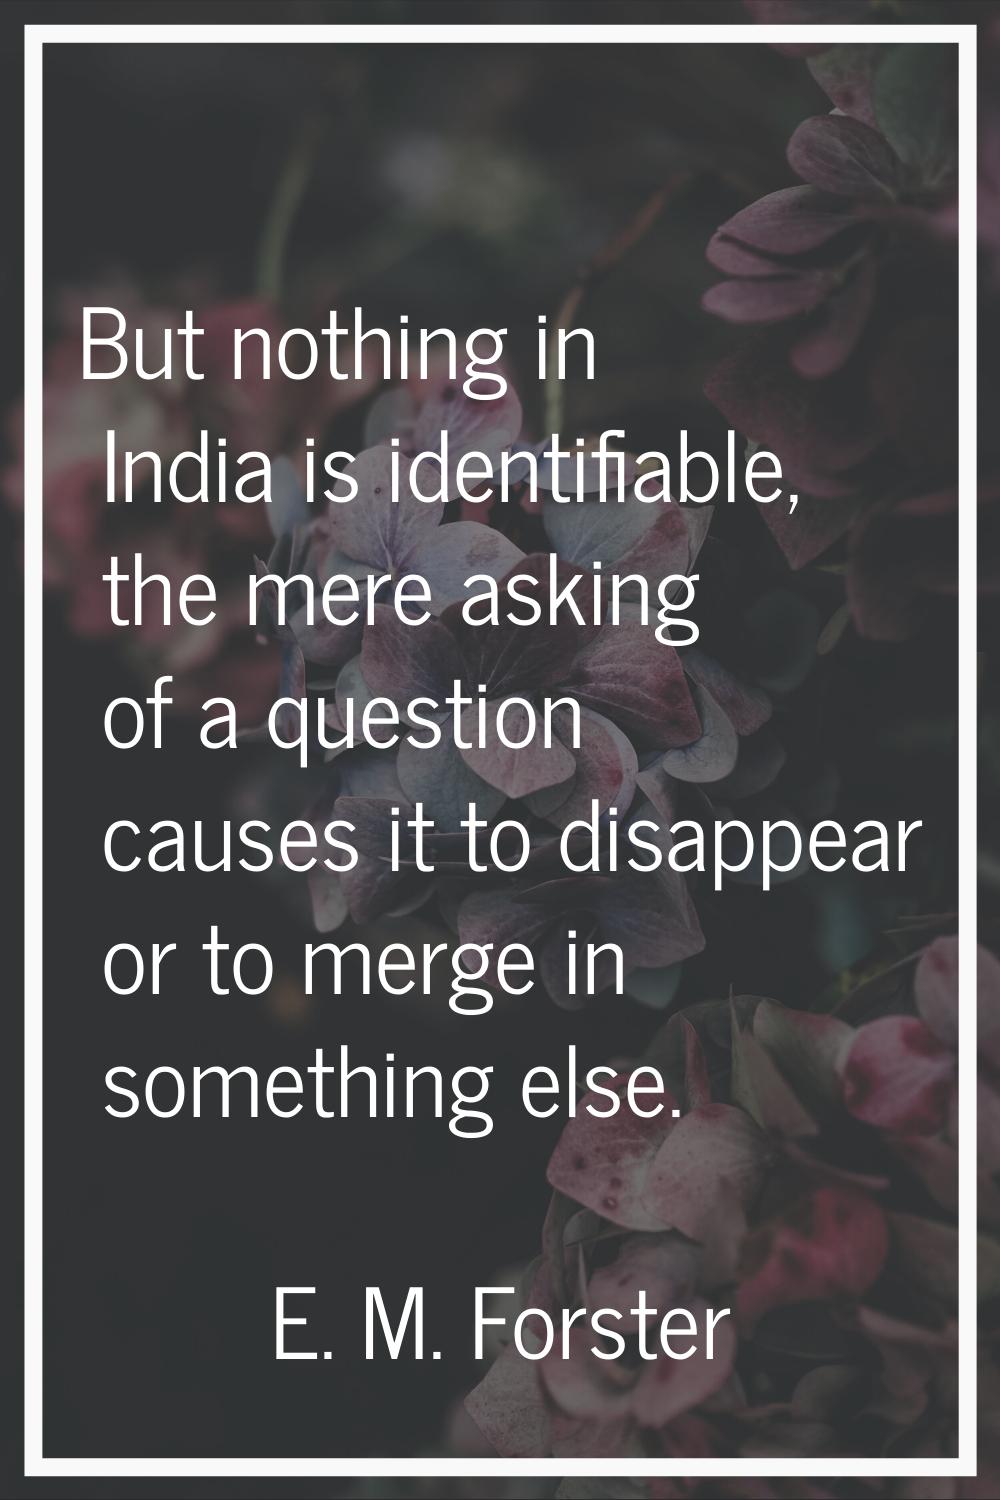 But nothing in India is identifiable, the mere asking of a question causes it to disappear or to me